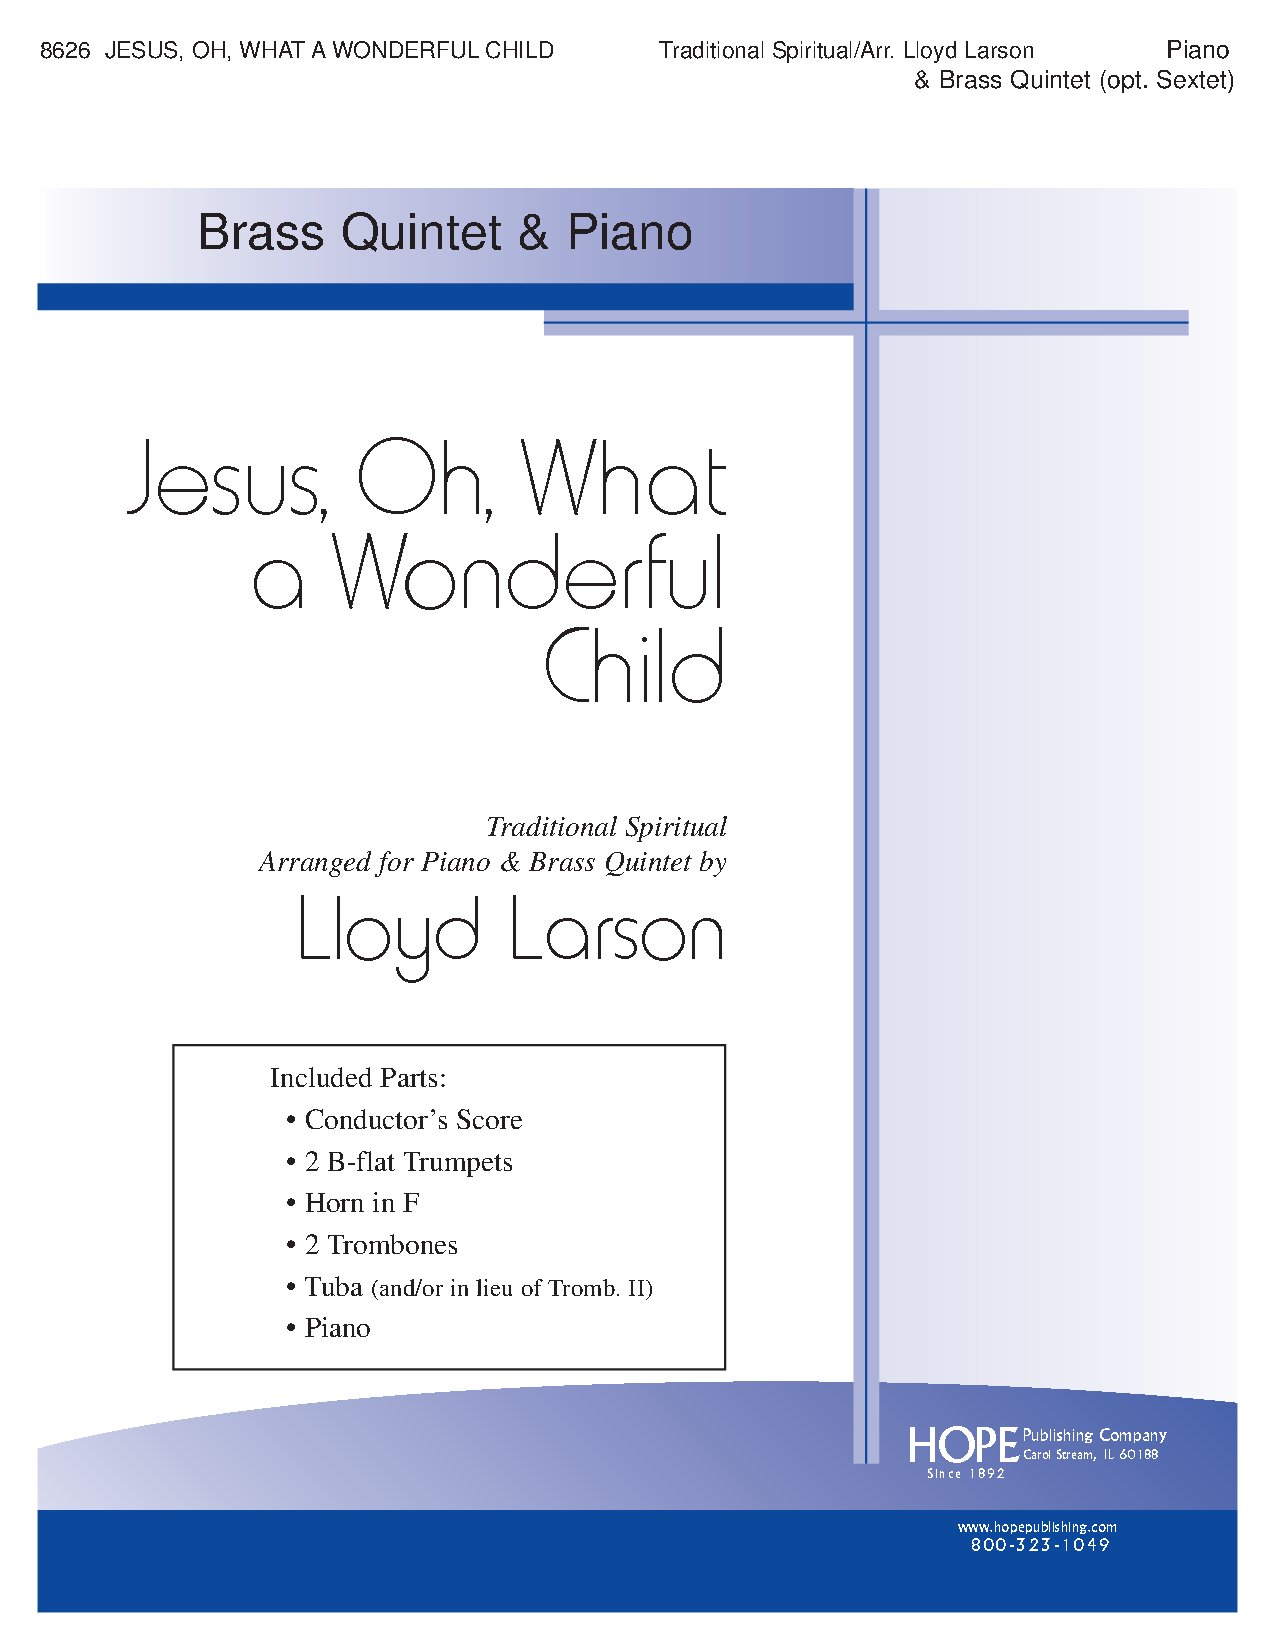 Jesus, Oh, What a Wonderful Child Brass Quintet and Piano P.O.D.